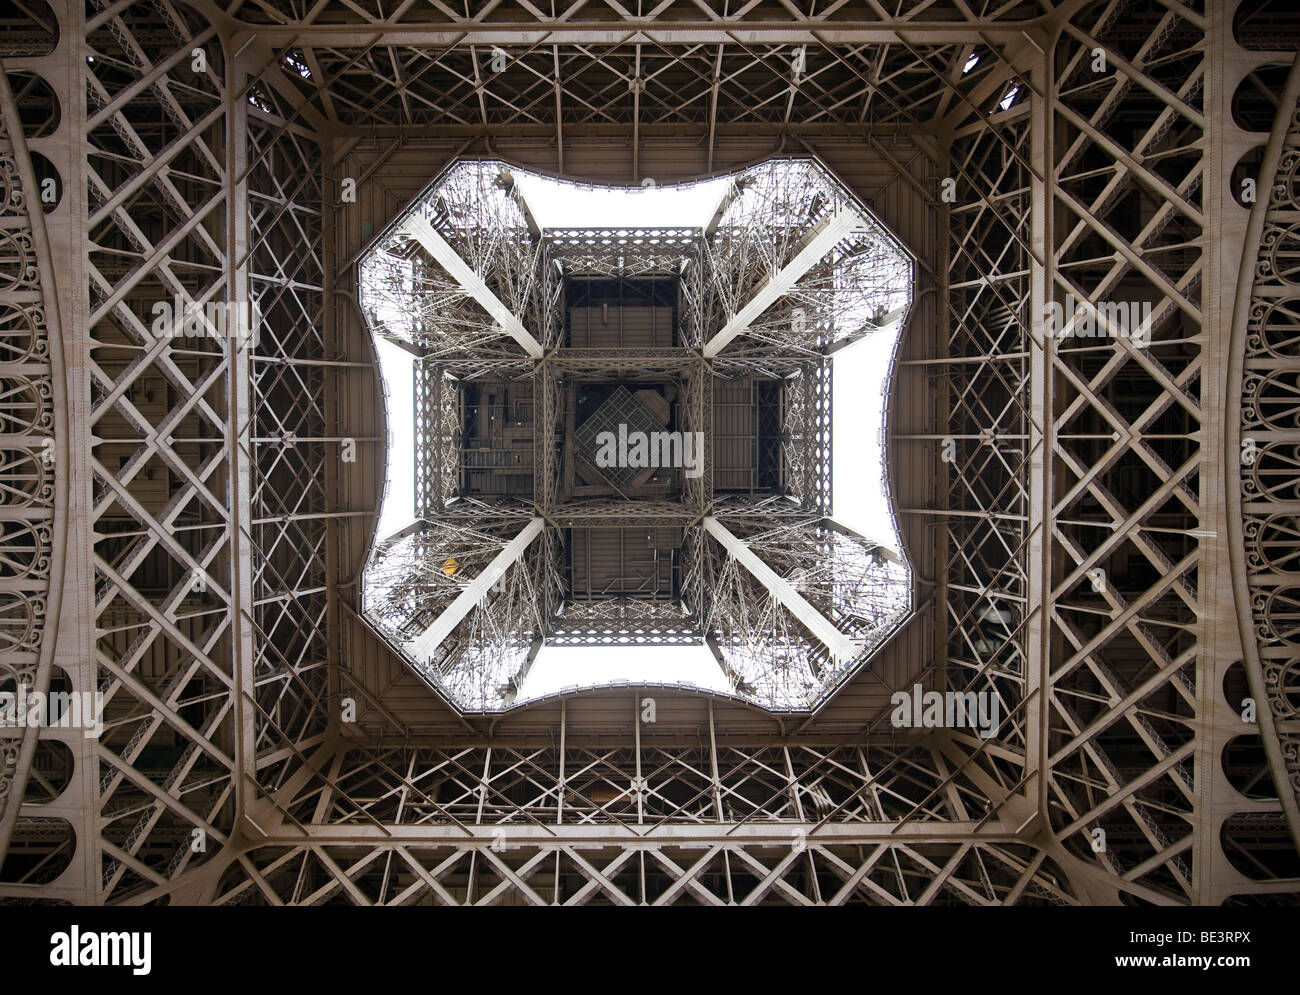 The Eiffel Tower in Paris, capital of France, seen from directly below. Stock Photo